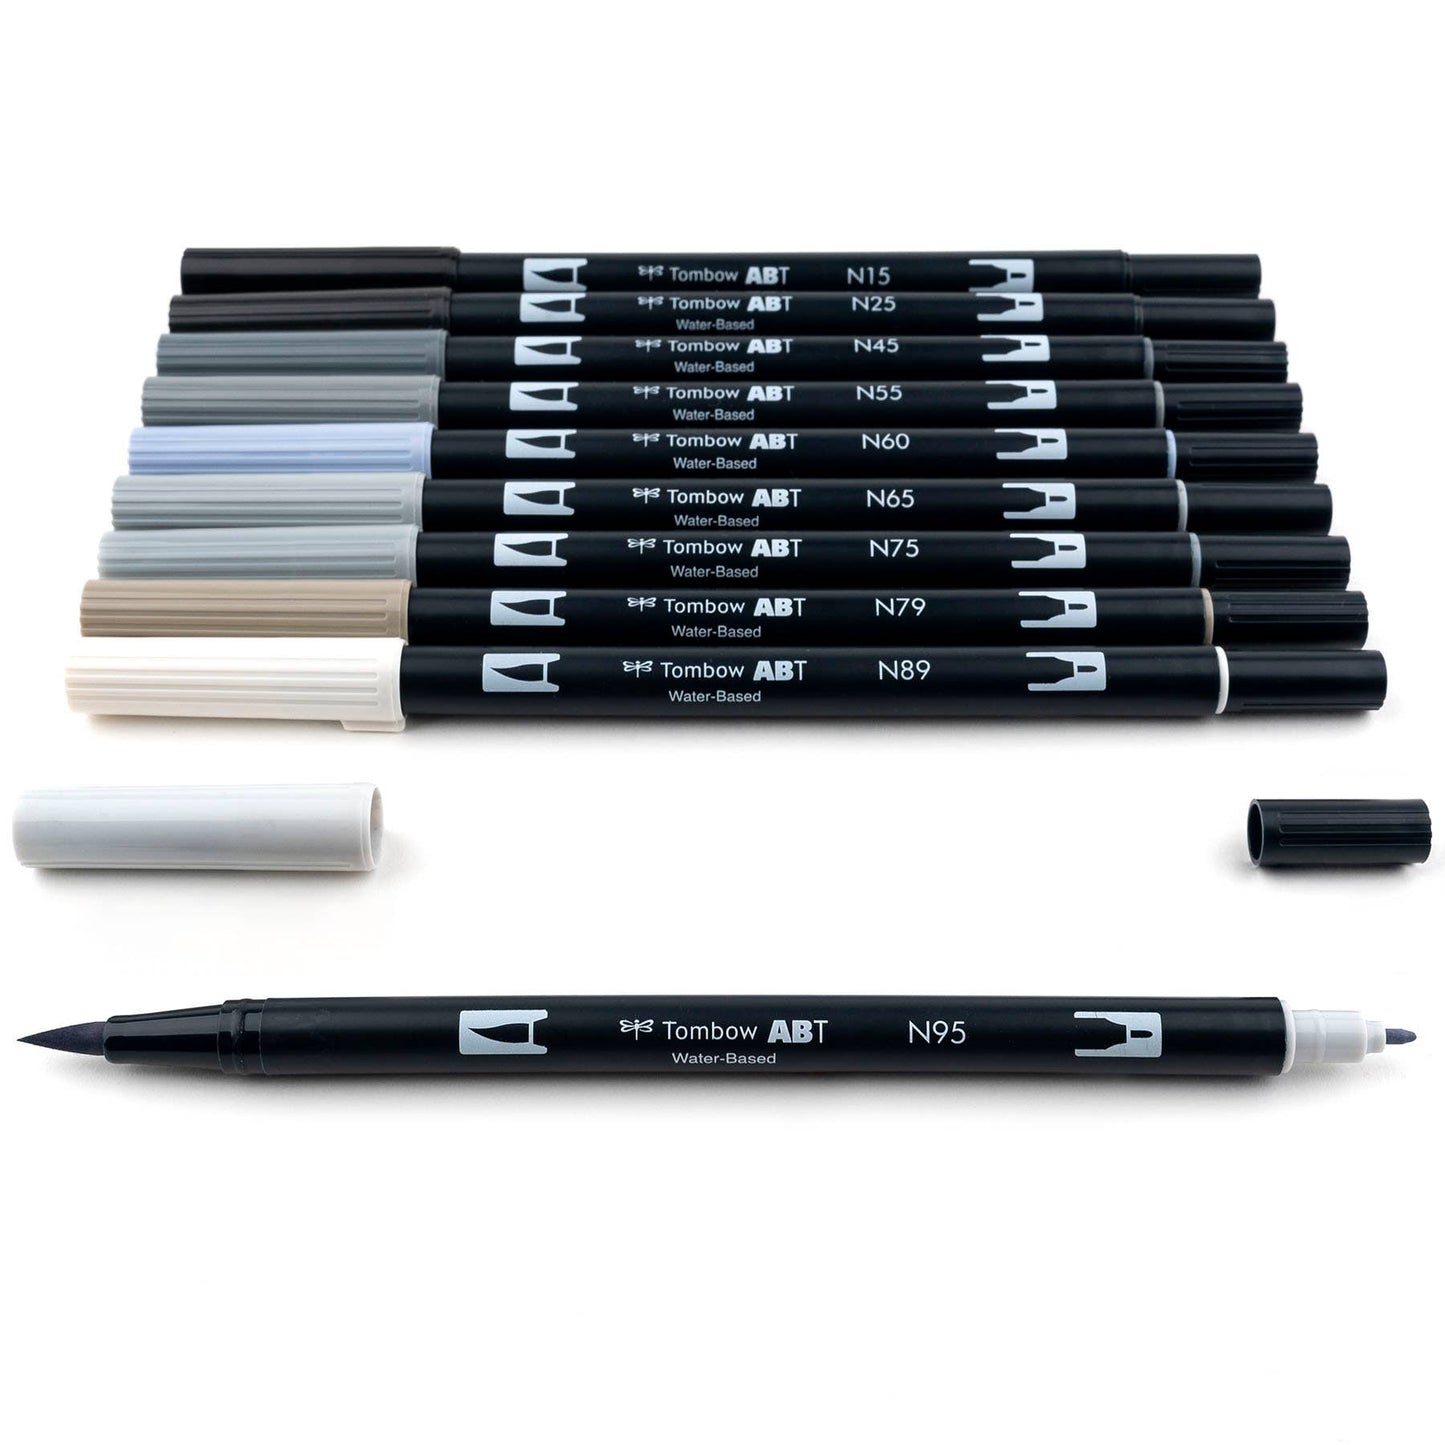 Dual Brush Pen Art Markers: Grayscale 10 Pack